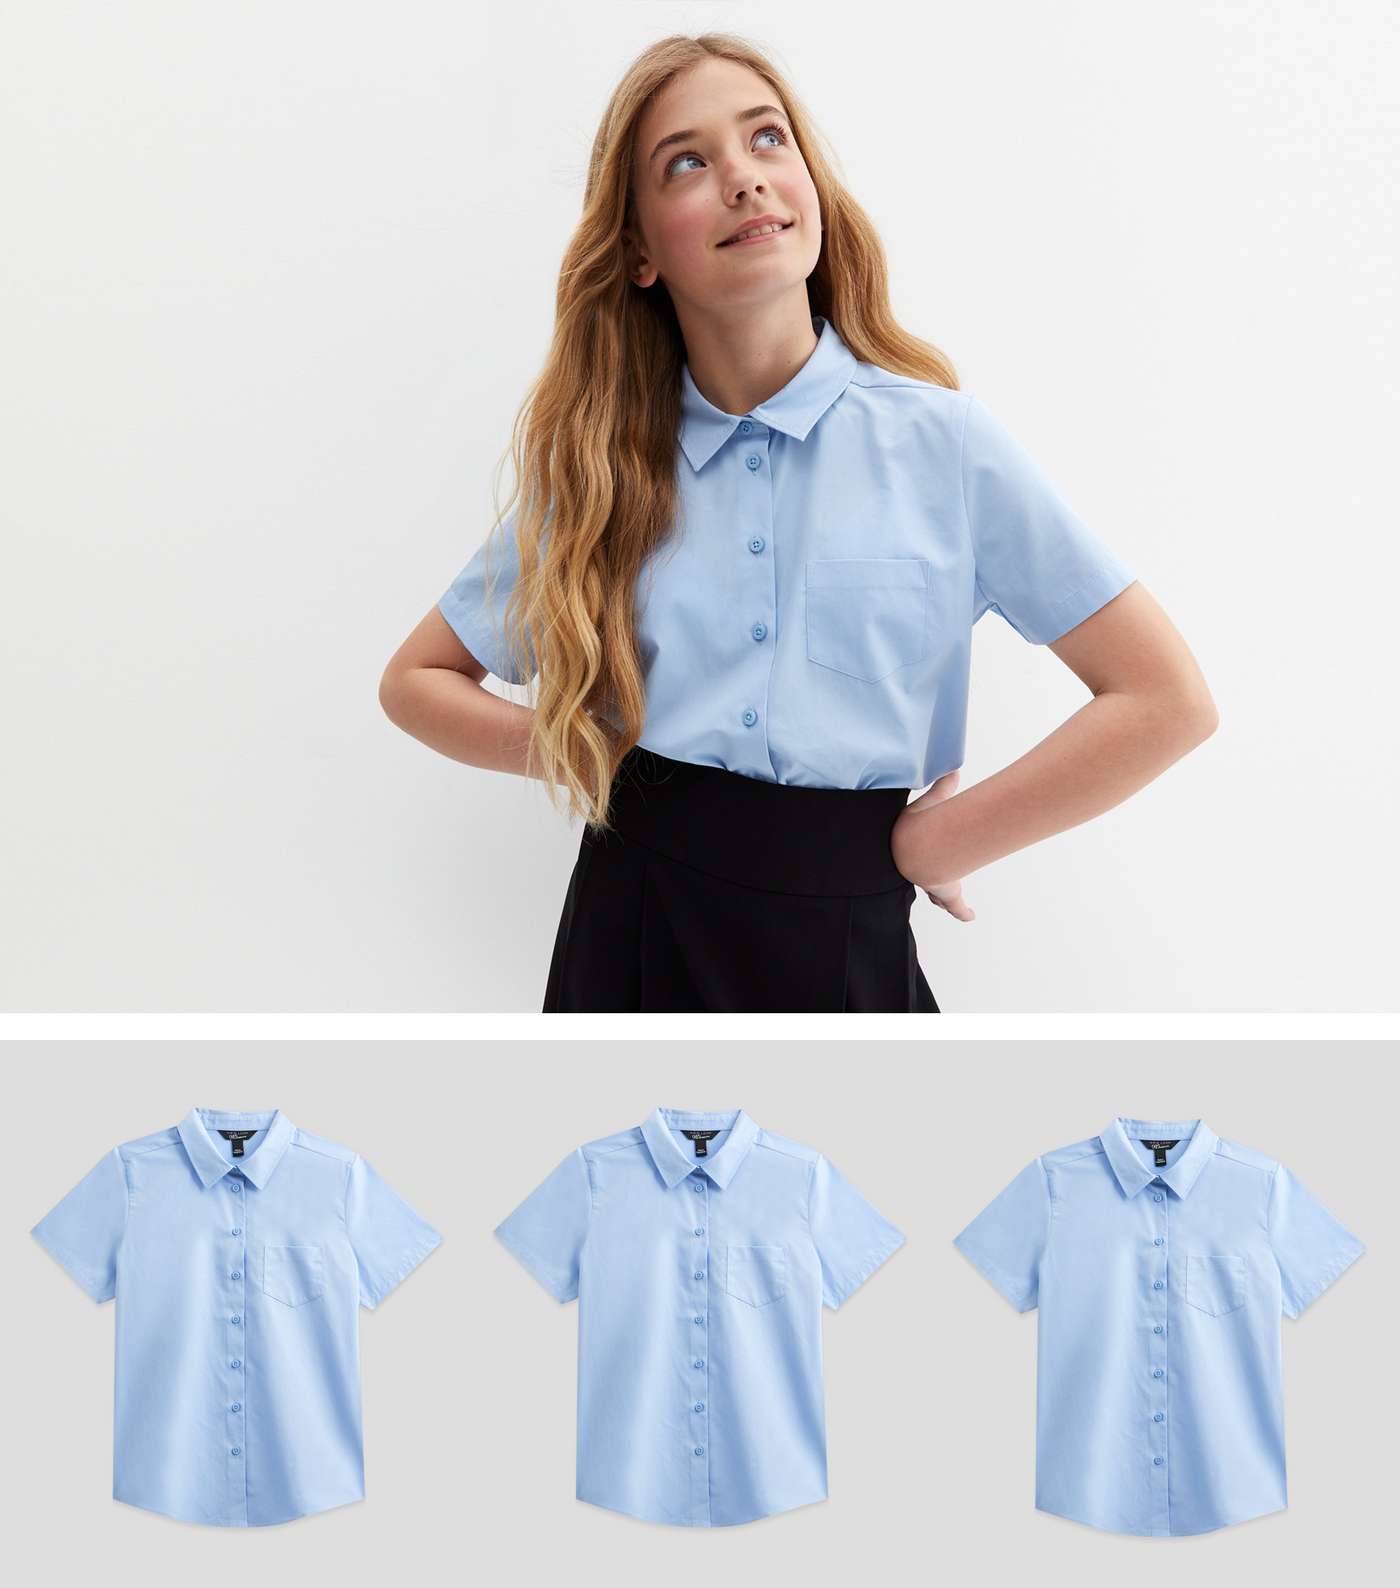 Girls 3 Pack Pale Blue Short Sleeve Collared Easy Care School Shirts